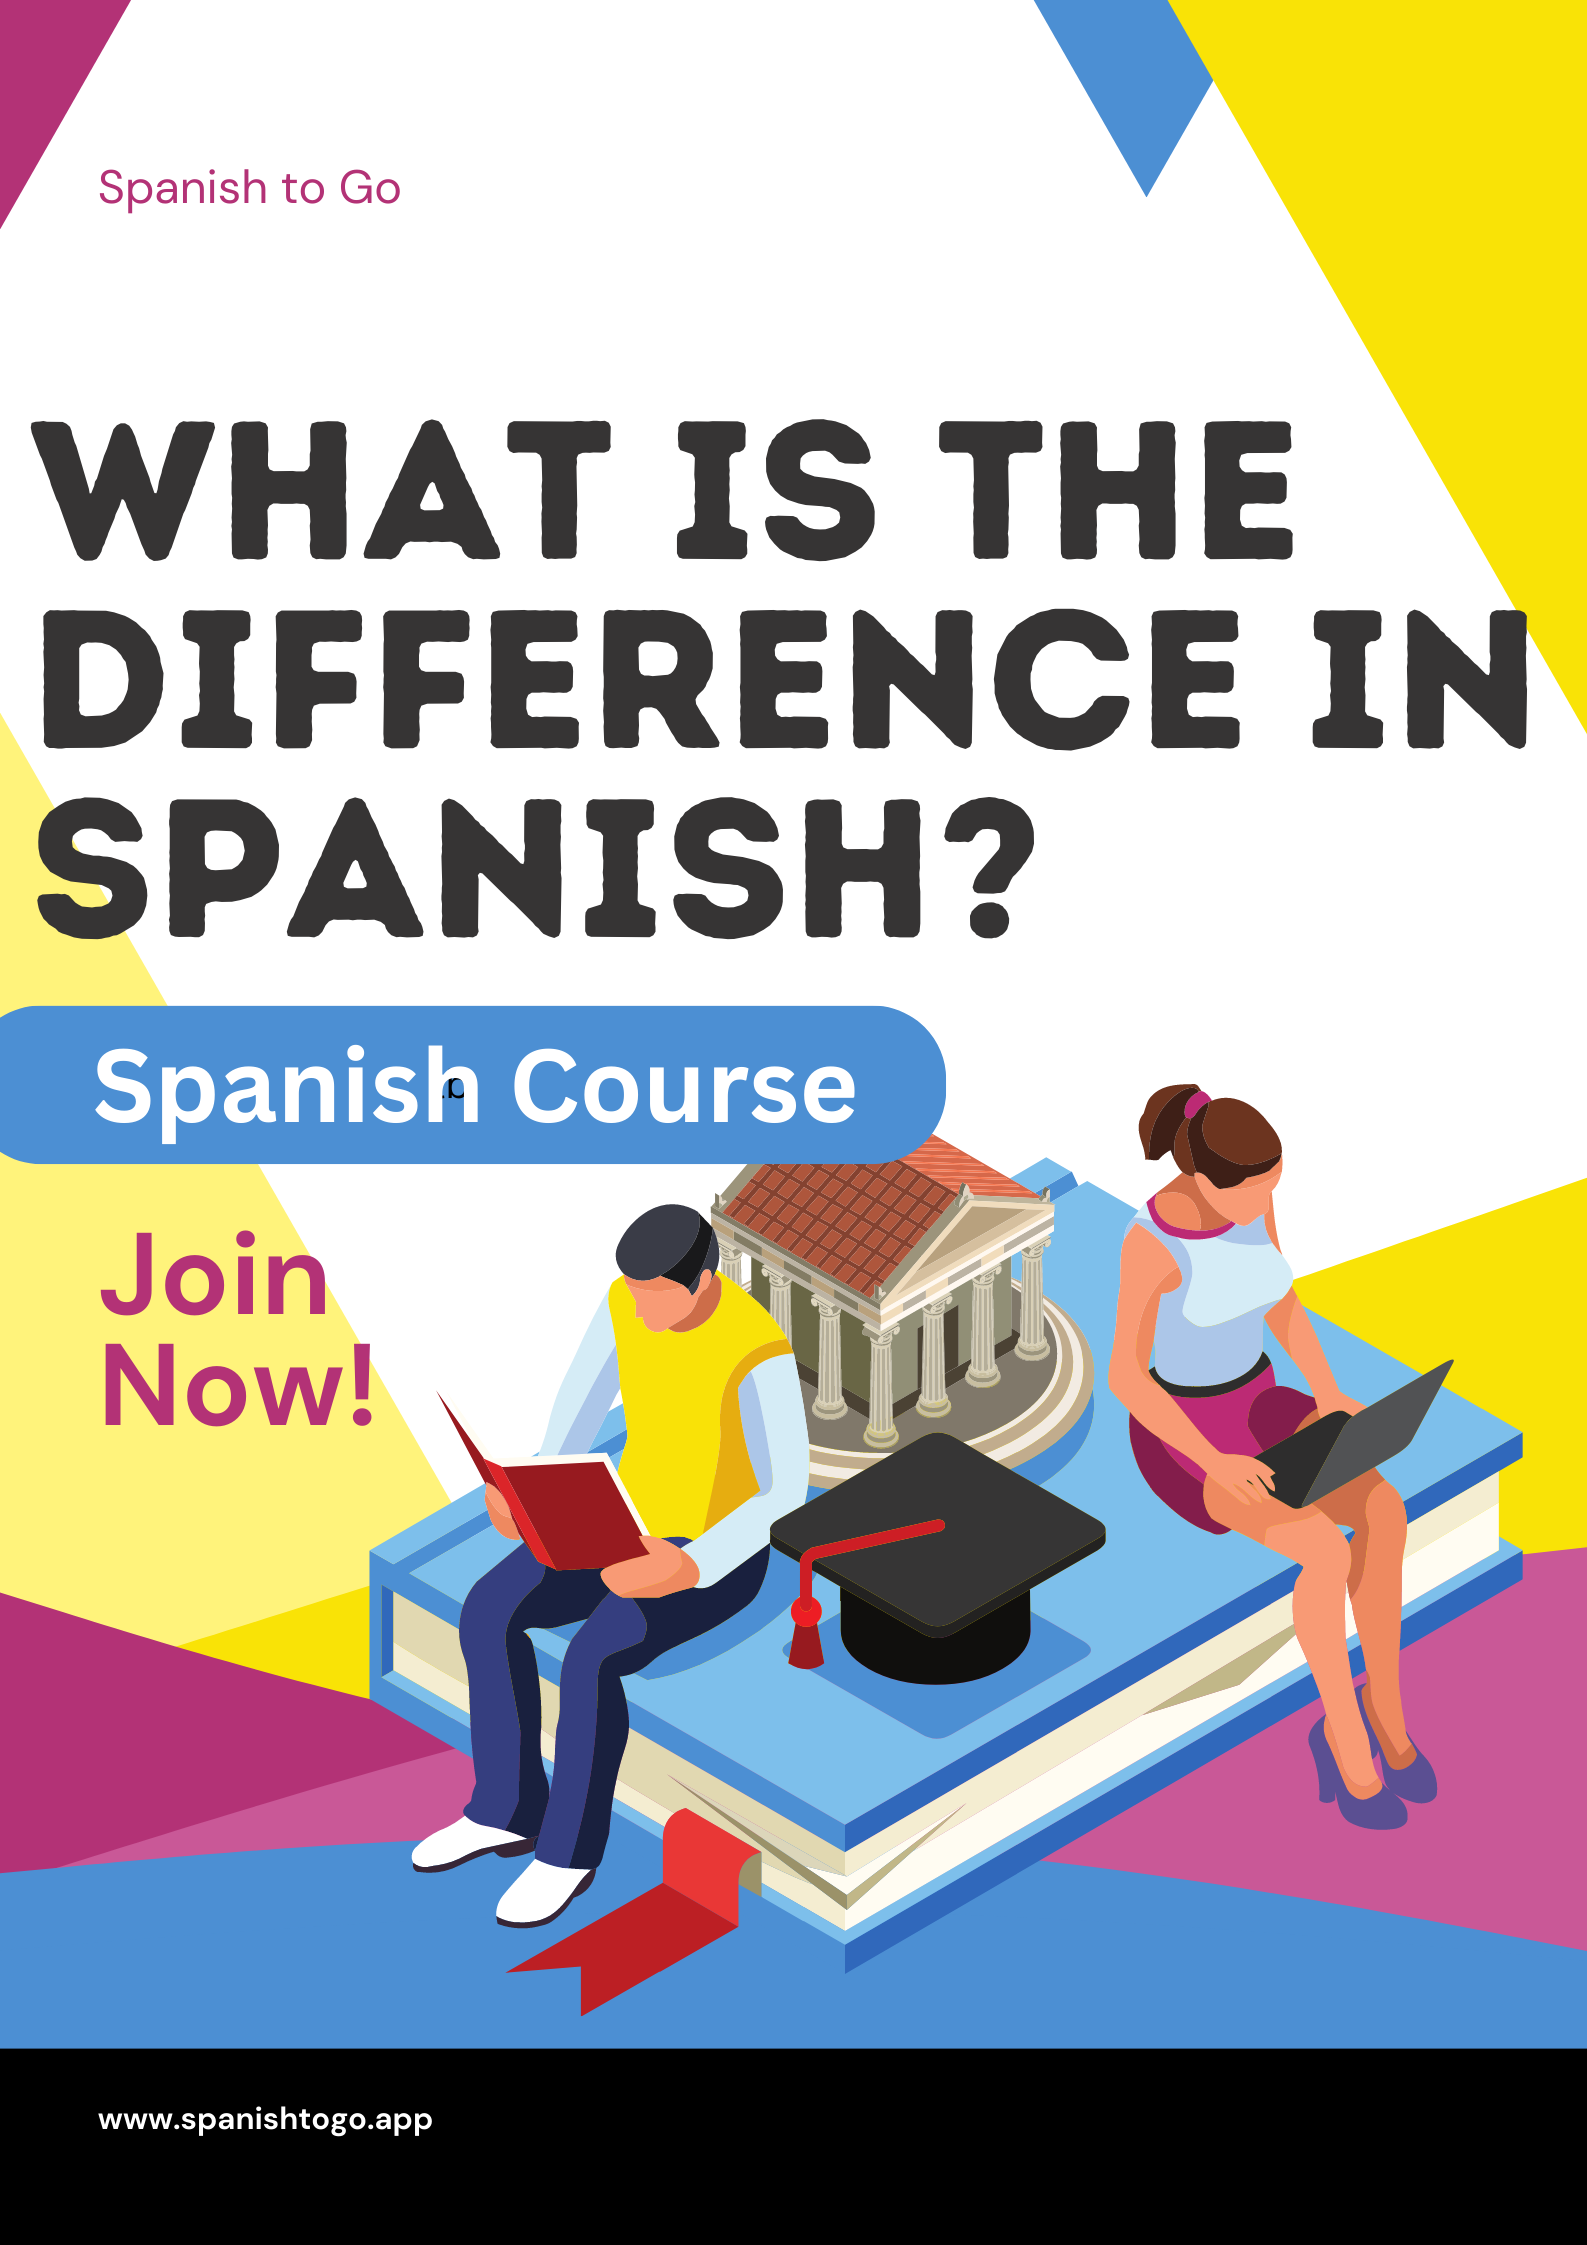 What is the difference in Spanish?